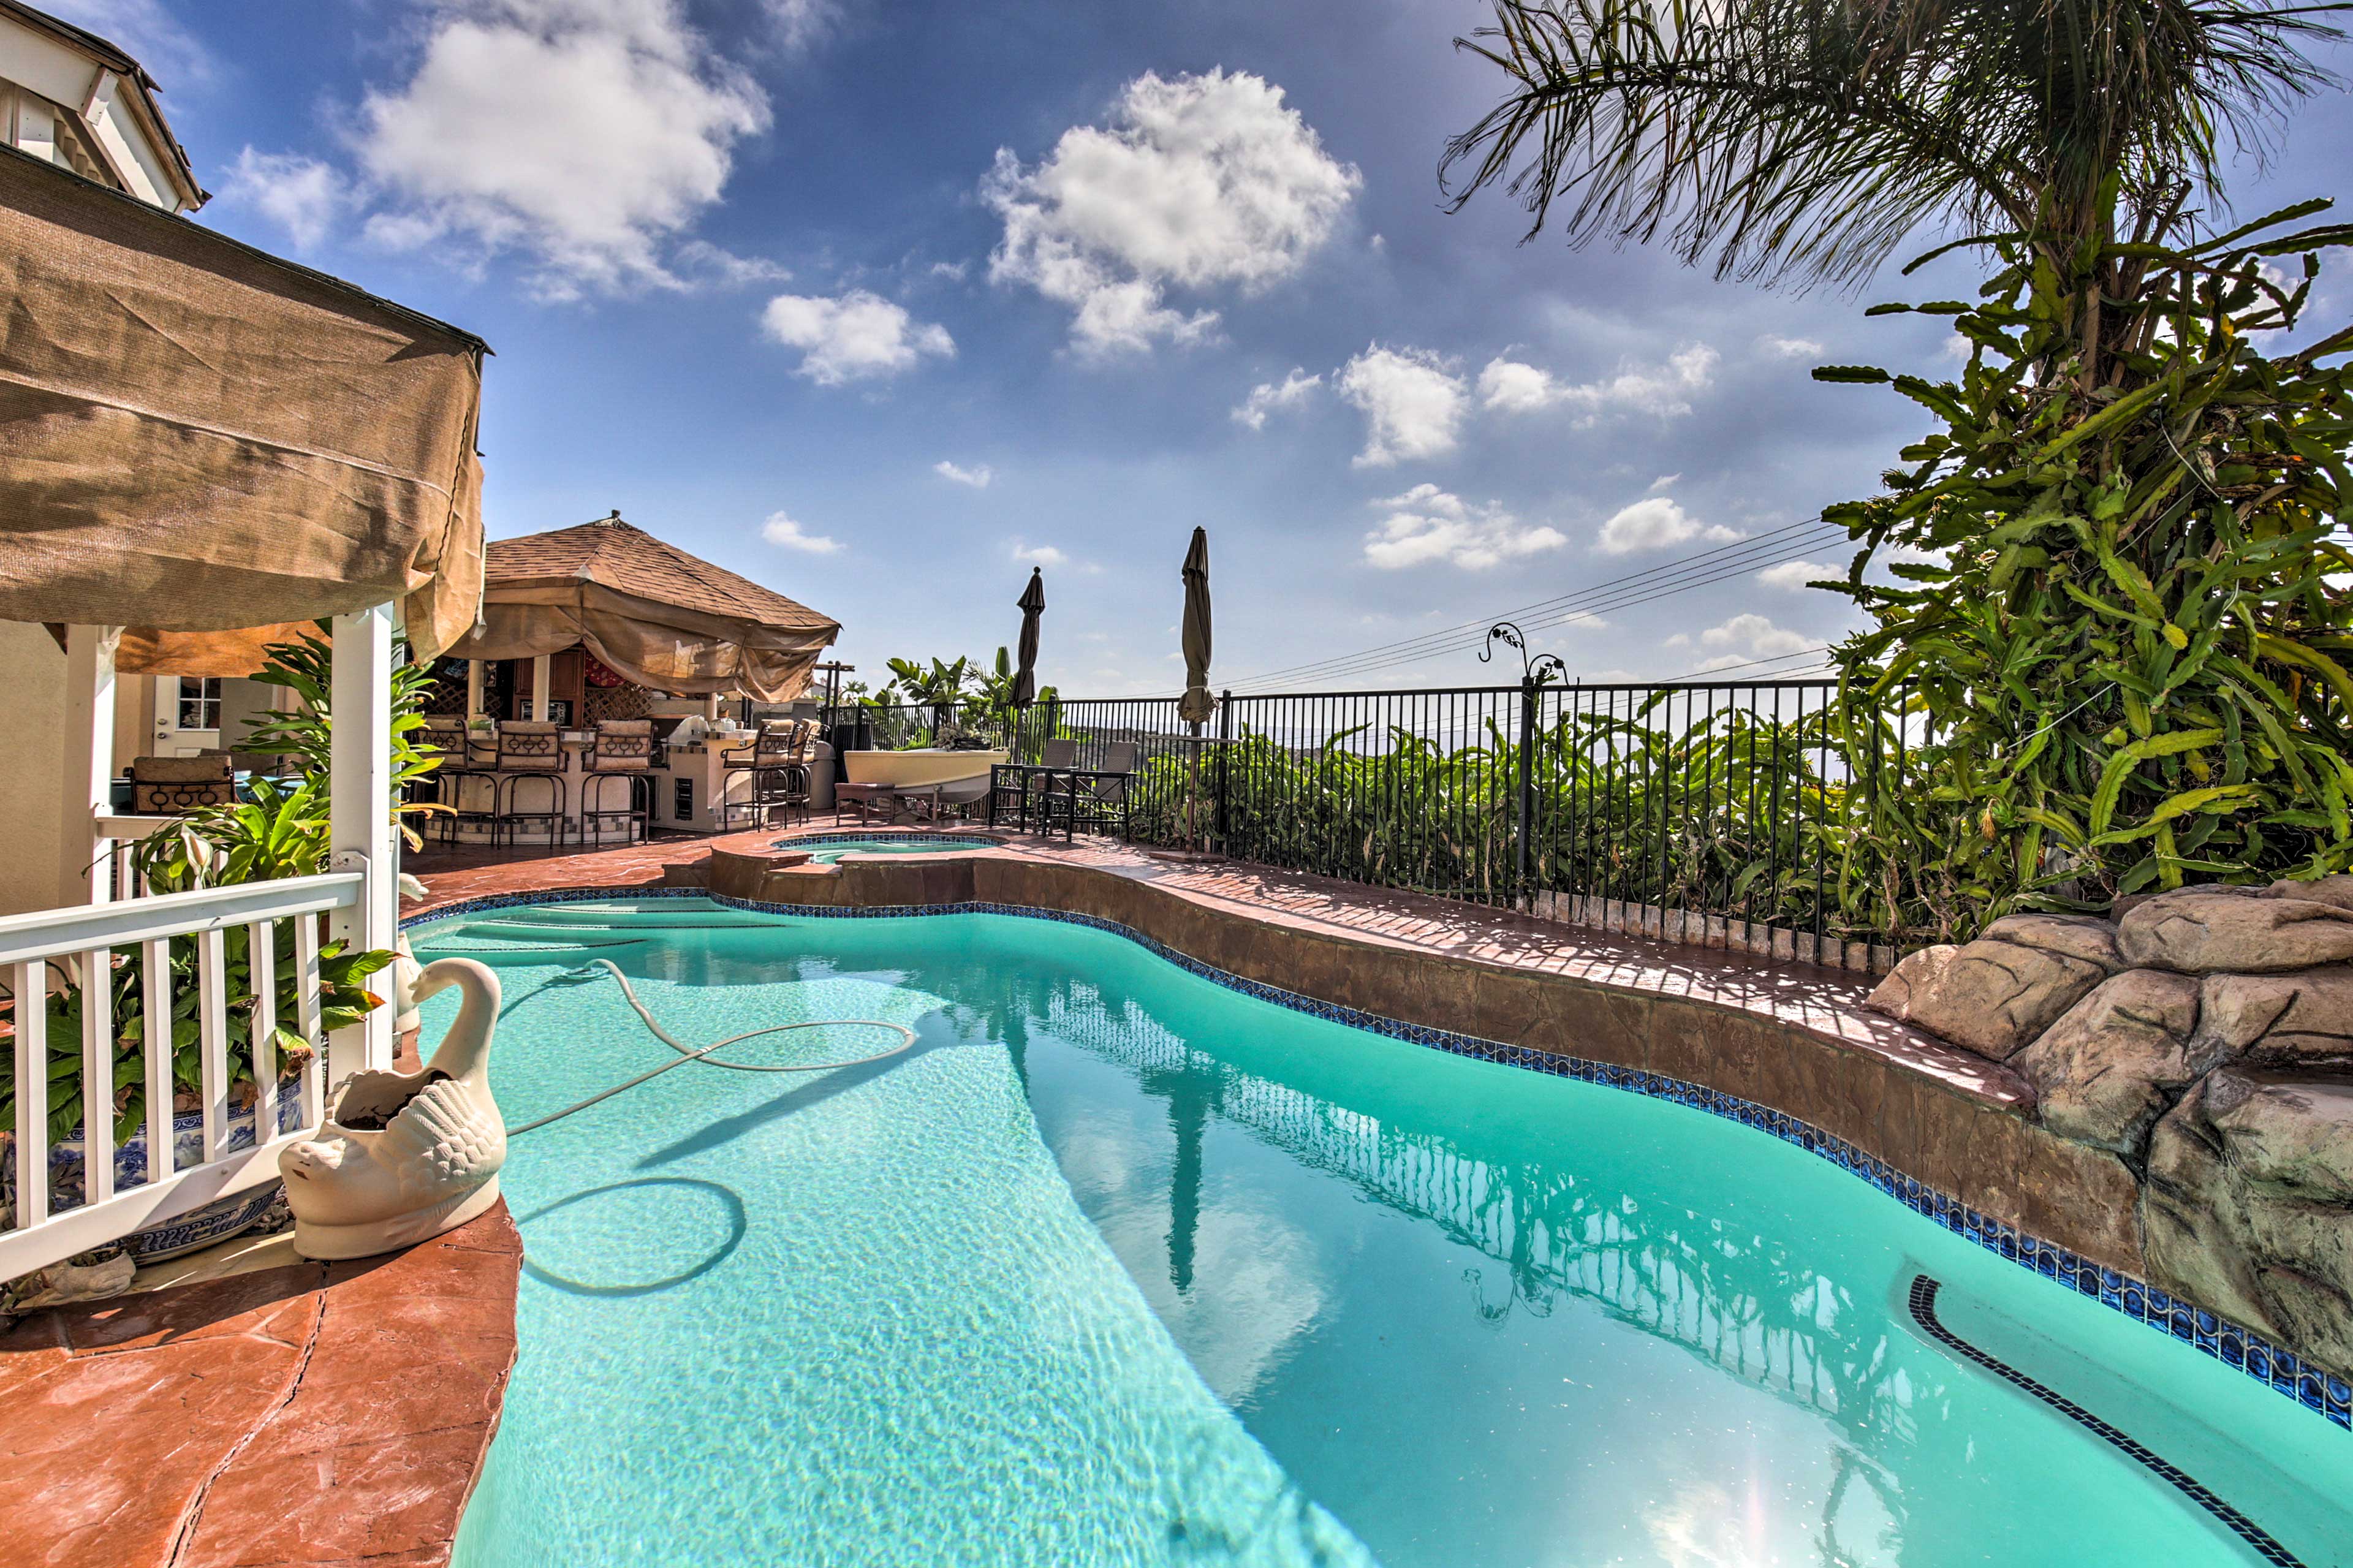 San Diego Vacation Rental | 5BR | 4BA | 3,391 Sq Ft | 2 Steps to Access